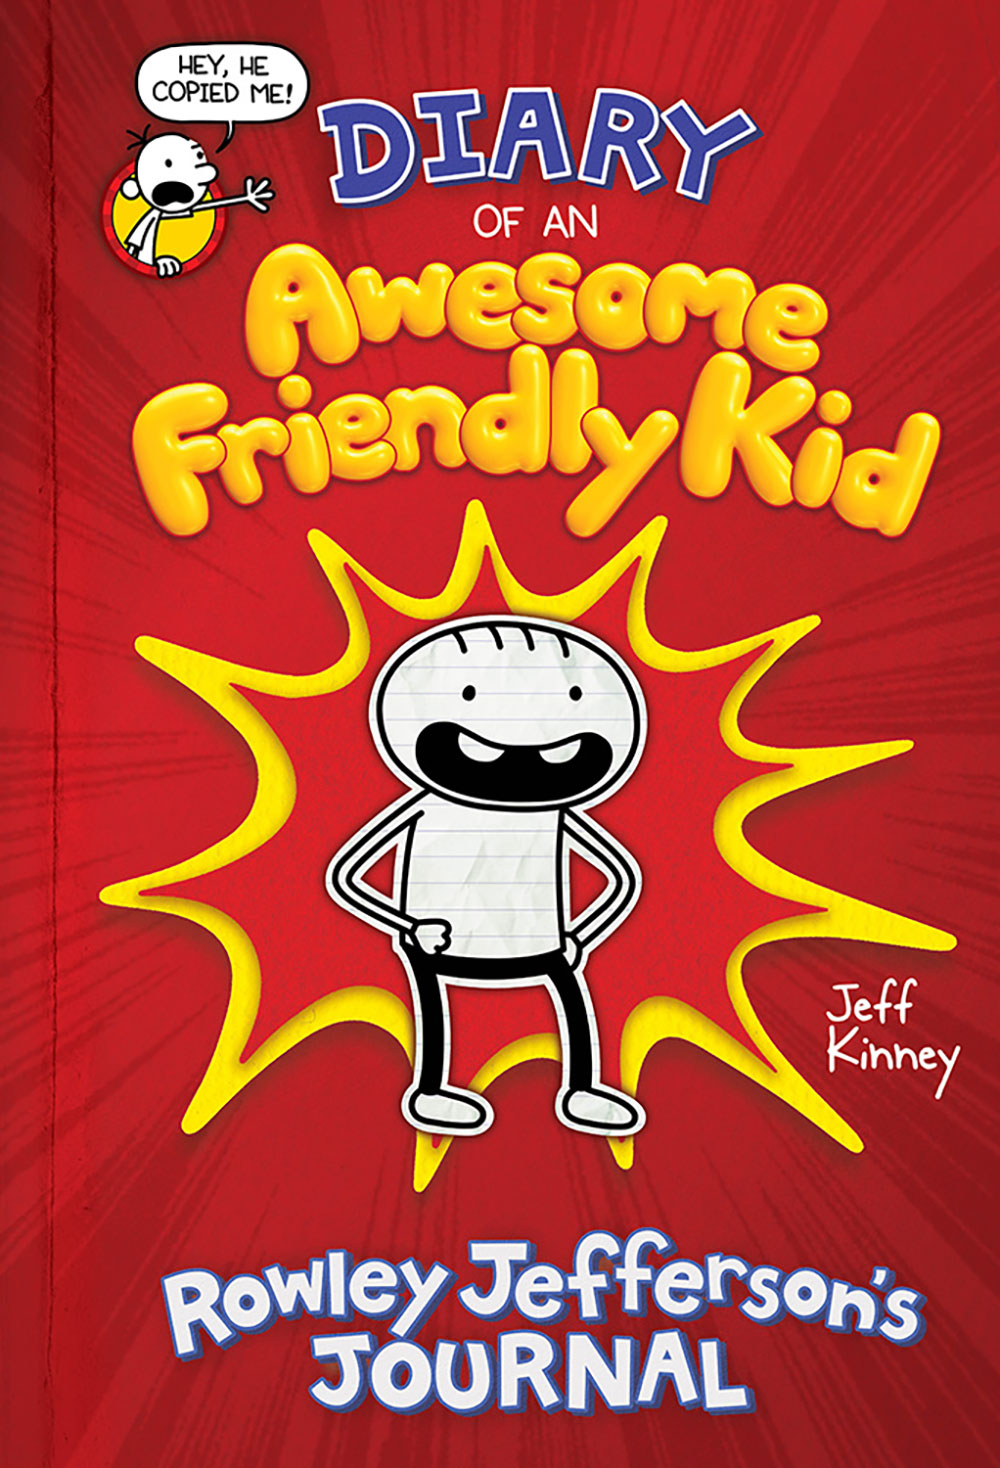 Diary of an Awesome Friendly Kid: Rowley Jefferson's Journal | 9-12 years old